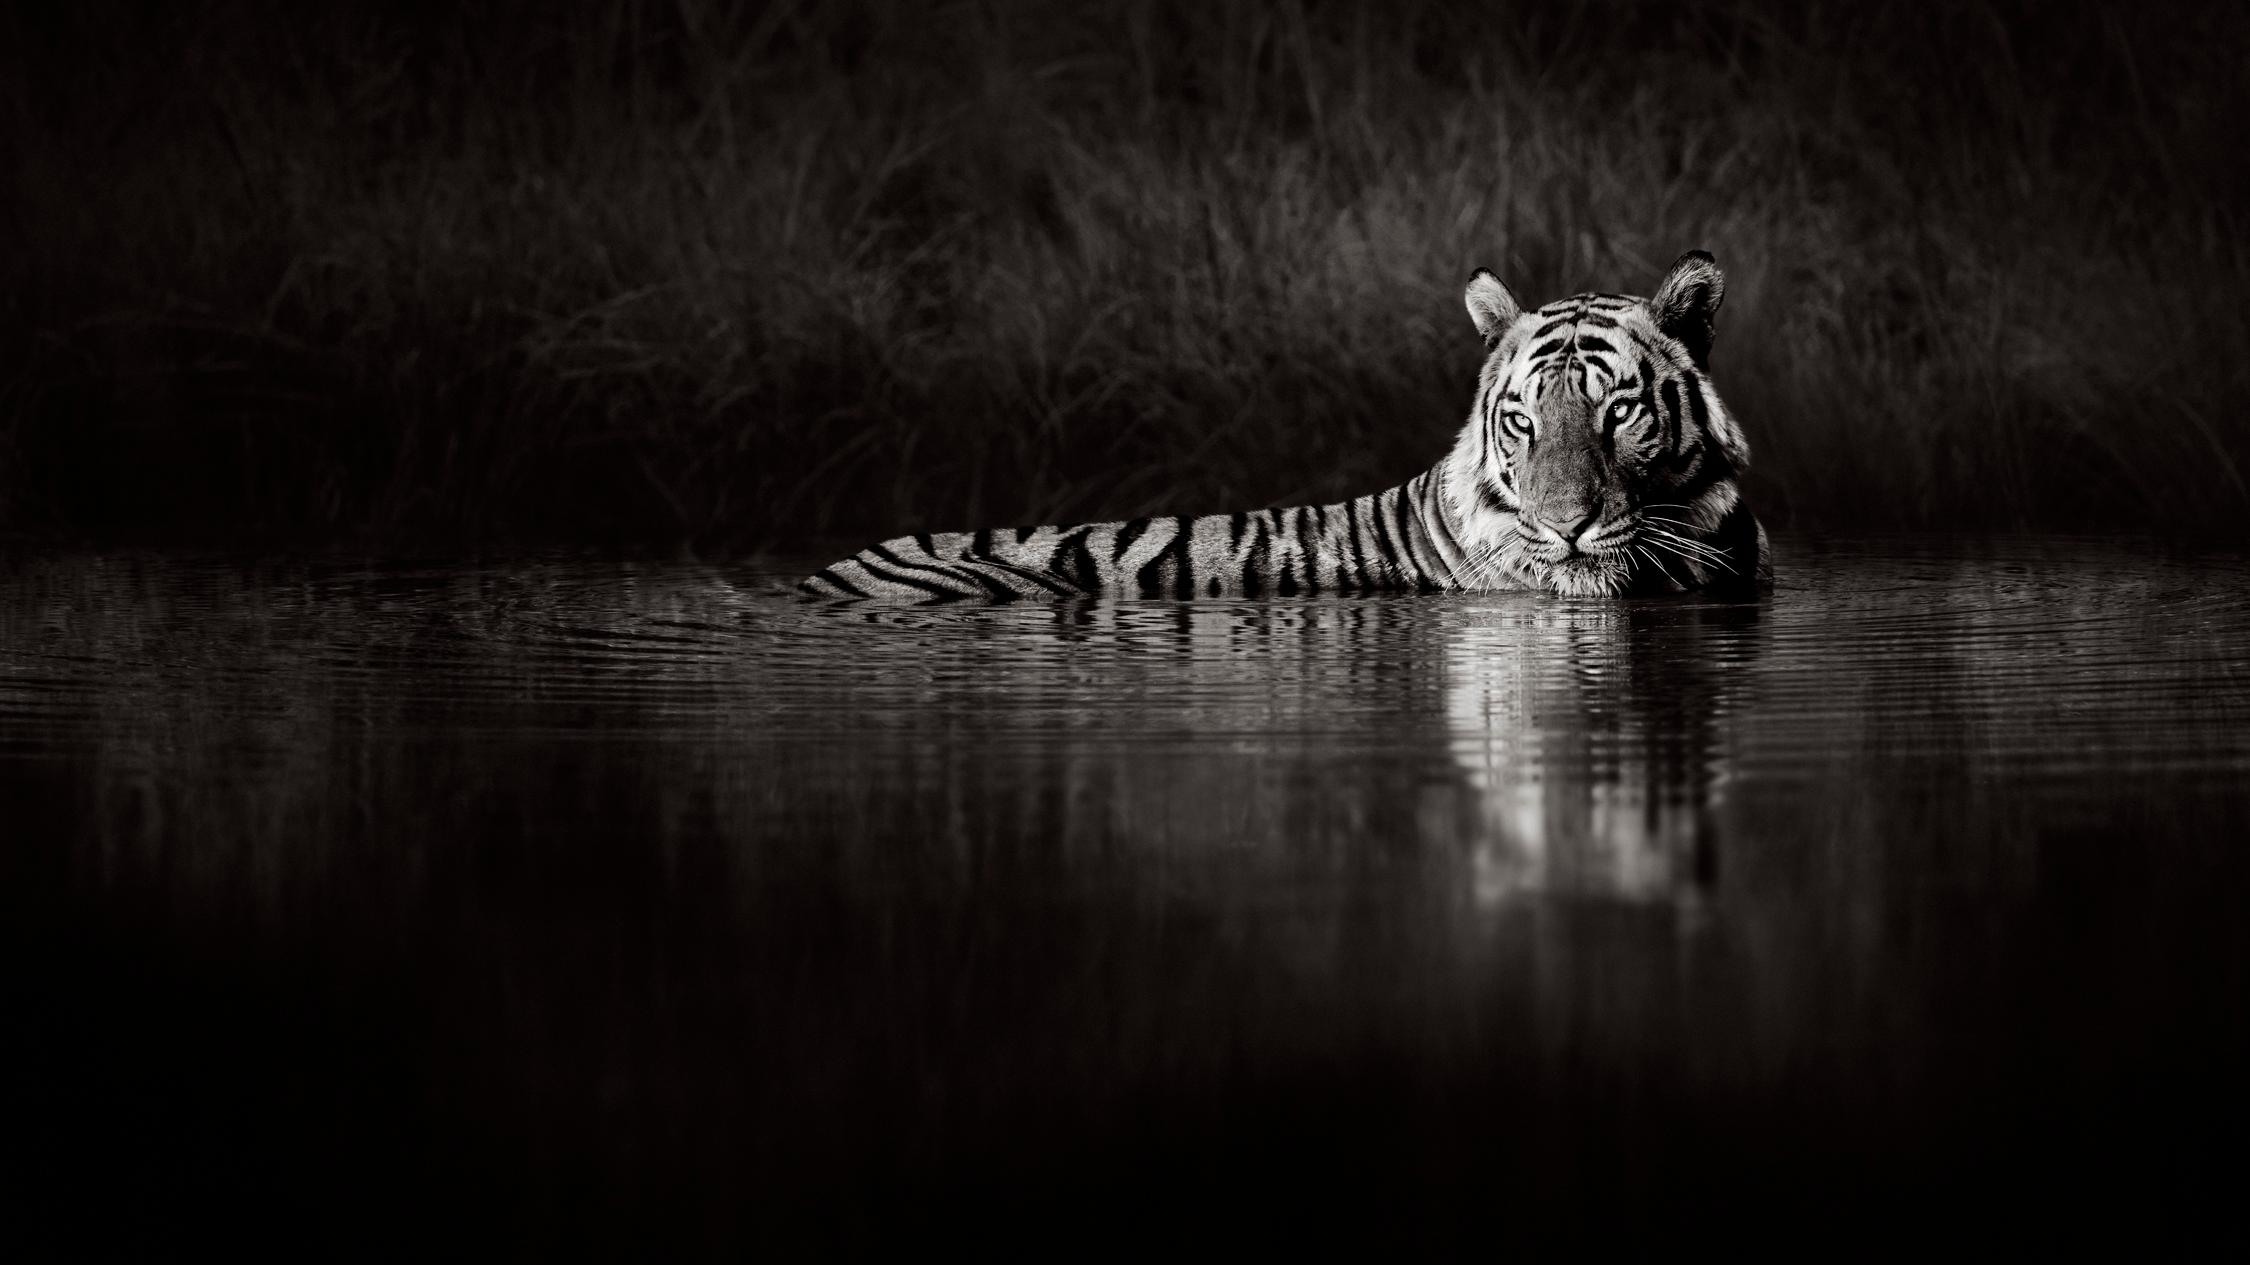 Drew Doggett Black and White Photograph - Surreal Black & White Tiger in a Dark Pool of Water in the Jungle of India